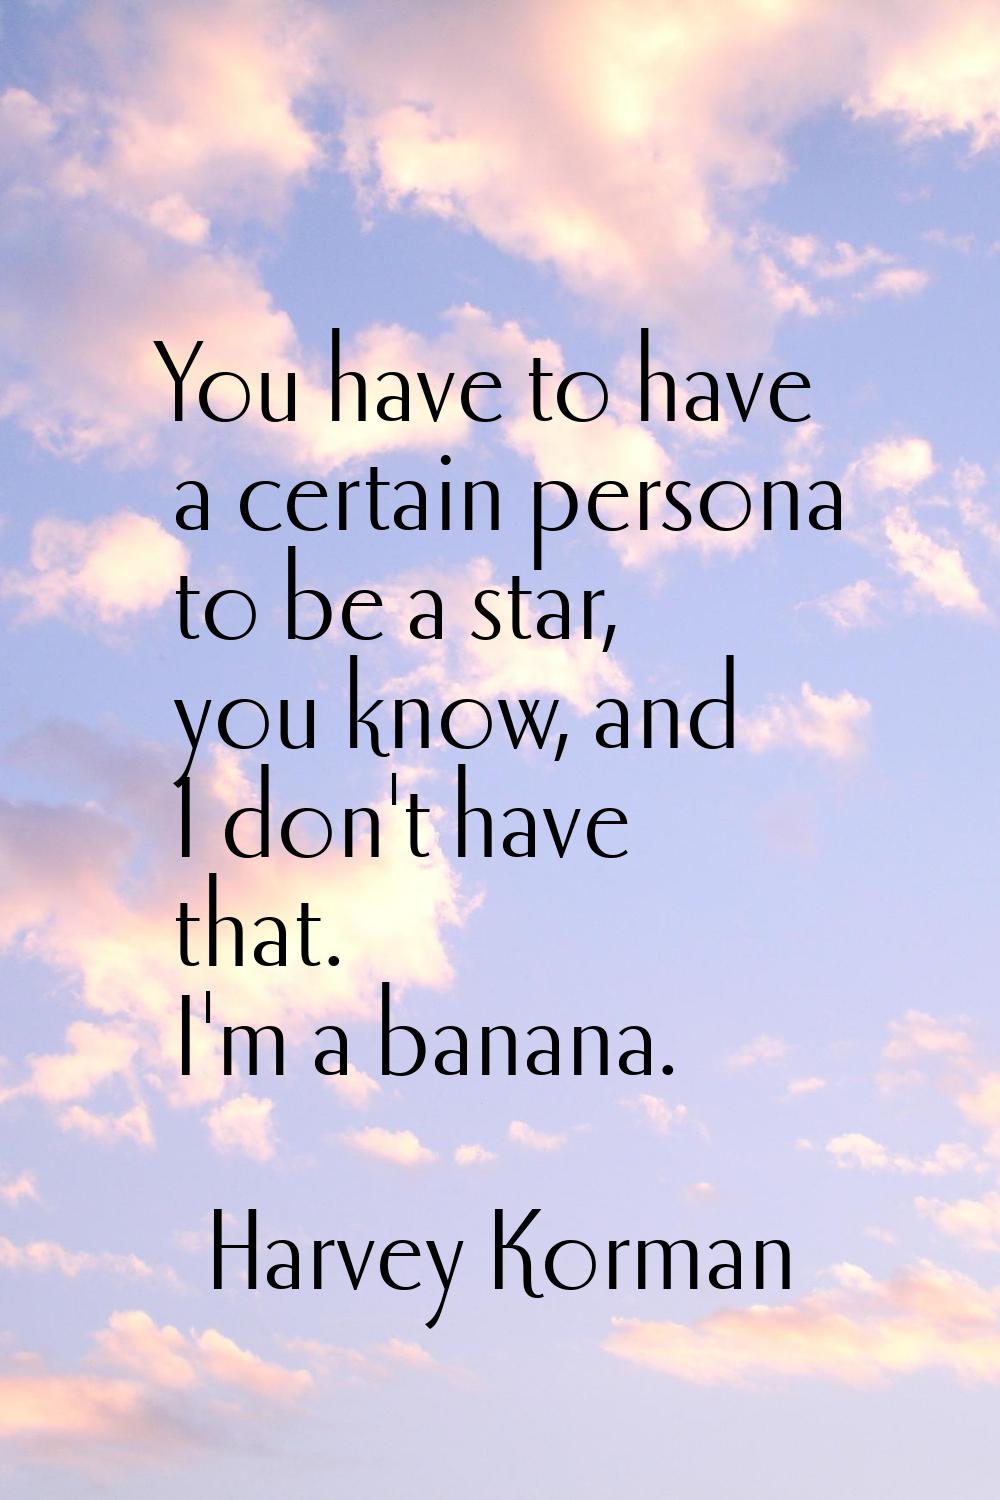 You have to have a certain persona to be a star, you know, and I don't have that. I'm a banana.